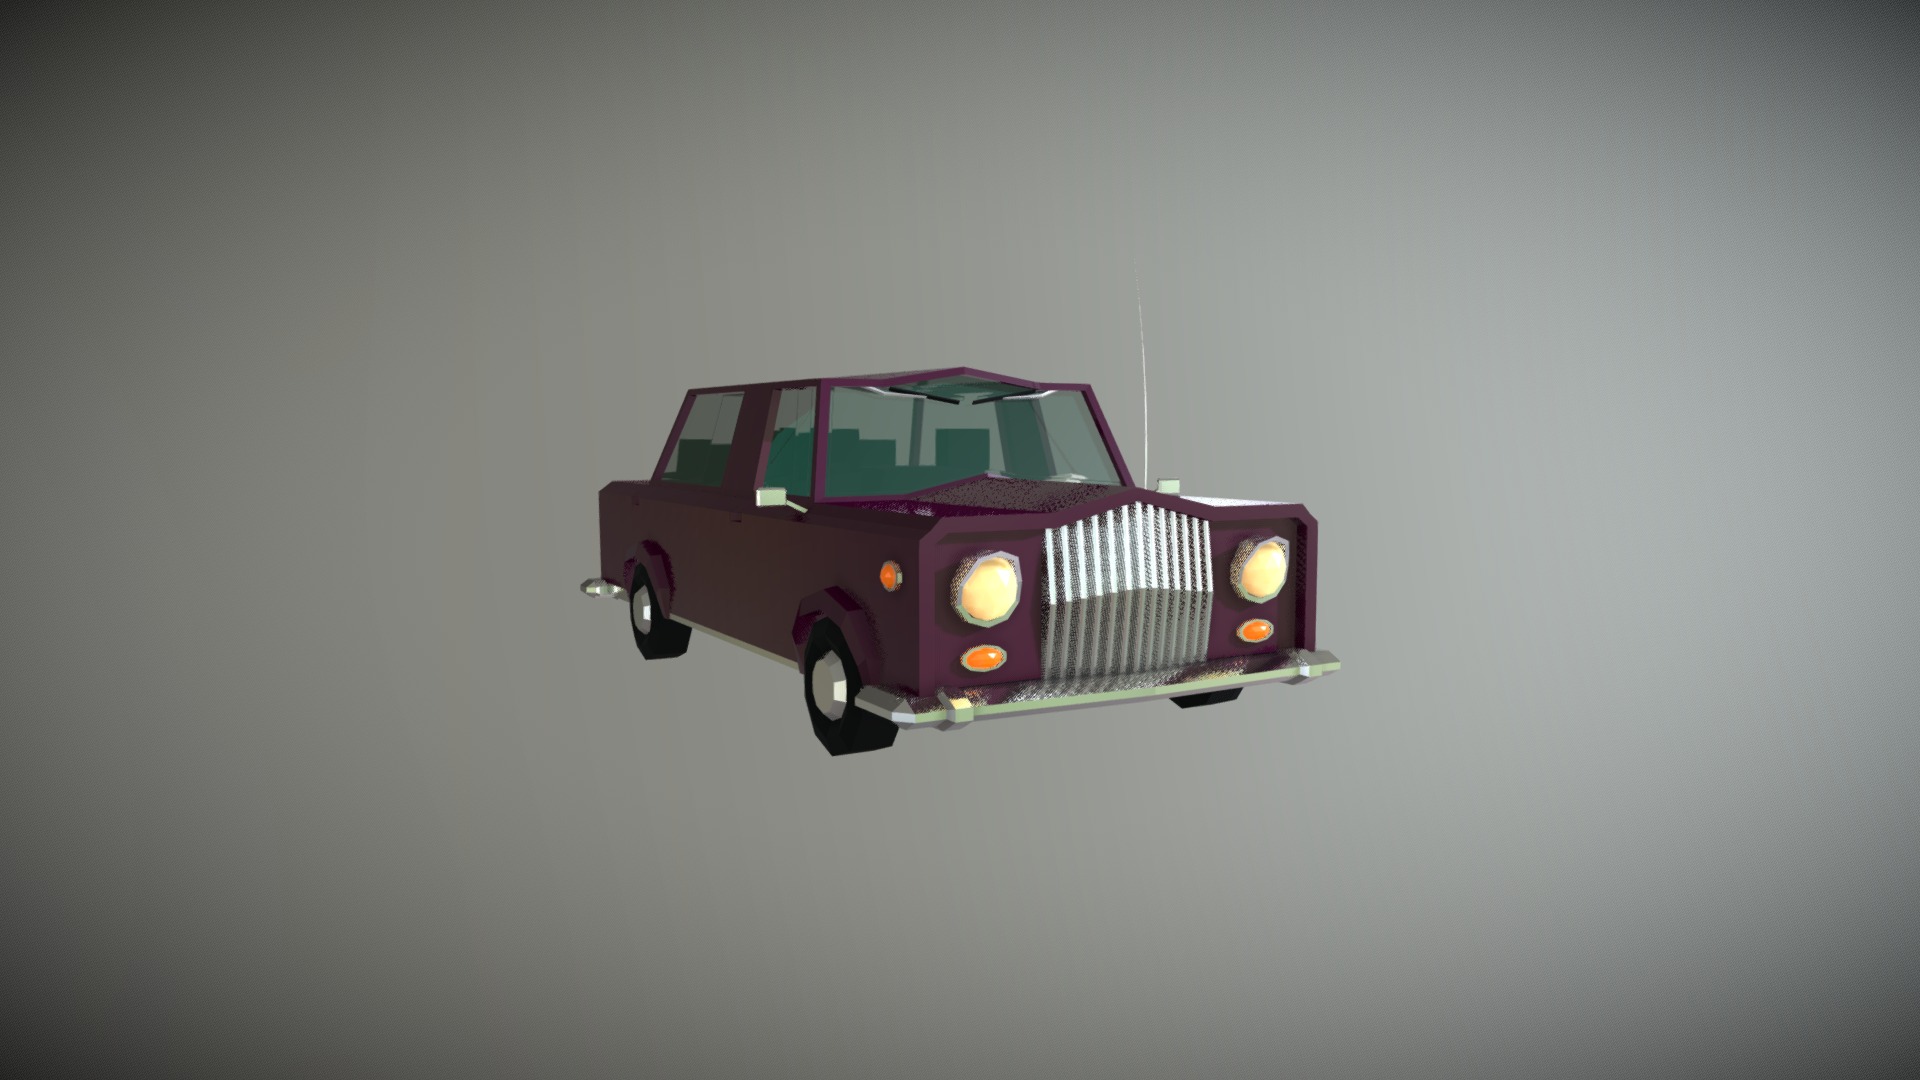 3D model Low Poly Limousine Car - This is a 3D model of the Low Poly Limousine Car. The 3D model is about a toy car with lights.